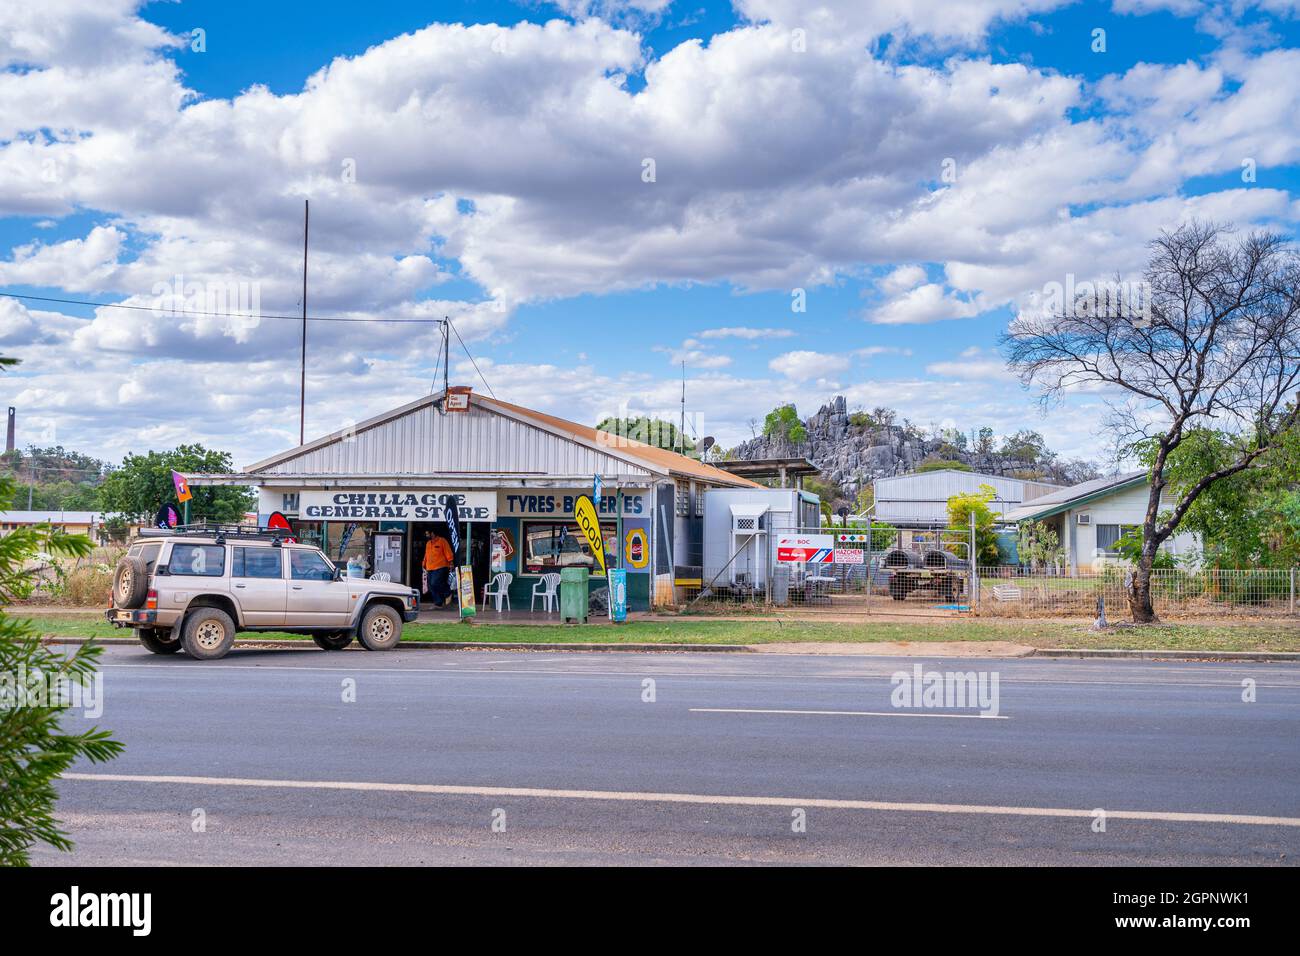 General store in small rural town of Chillagoe, North Queensland, Australia Stock Photo